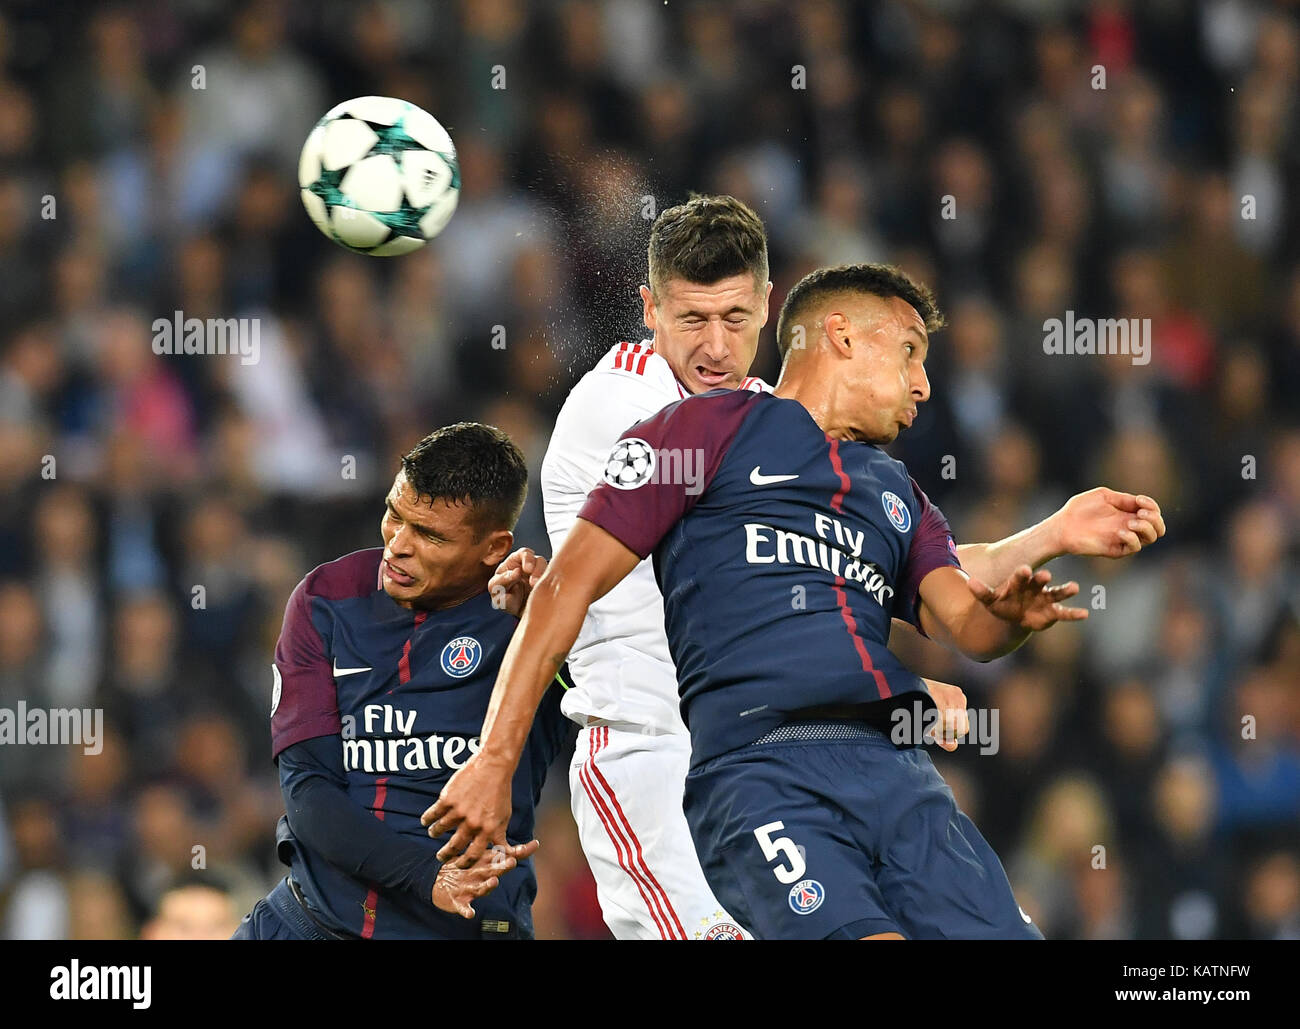 Paris, France. 27th Sep, 2017. Robert Lewandowski (c) of Bayern and Thiago Silva (l) and Marquinhos of Paris vie for the ball during the Champions League football match between Paris St. Germain and Bayern Munich at the Parc des Princes stadium in Paris, France, 27 September 2017. Credit: Peter Kneffel/dpa/Alamy Live News Stock Photo